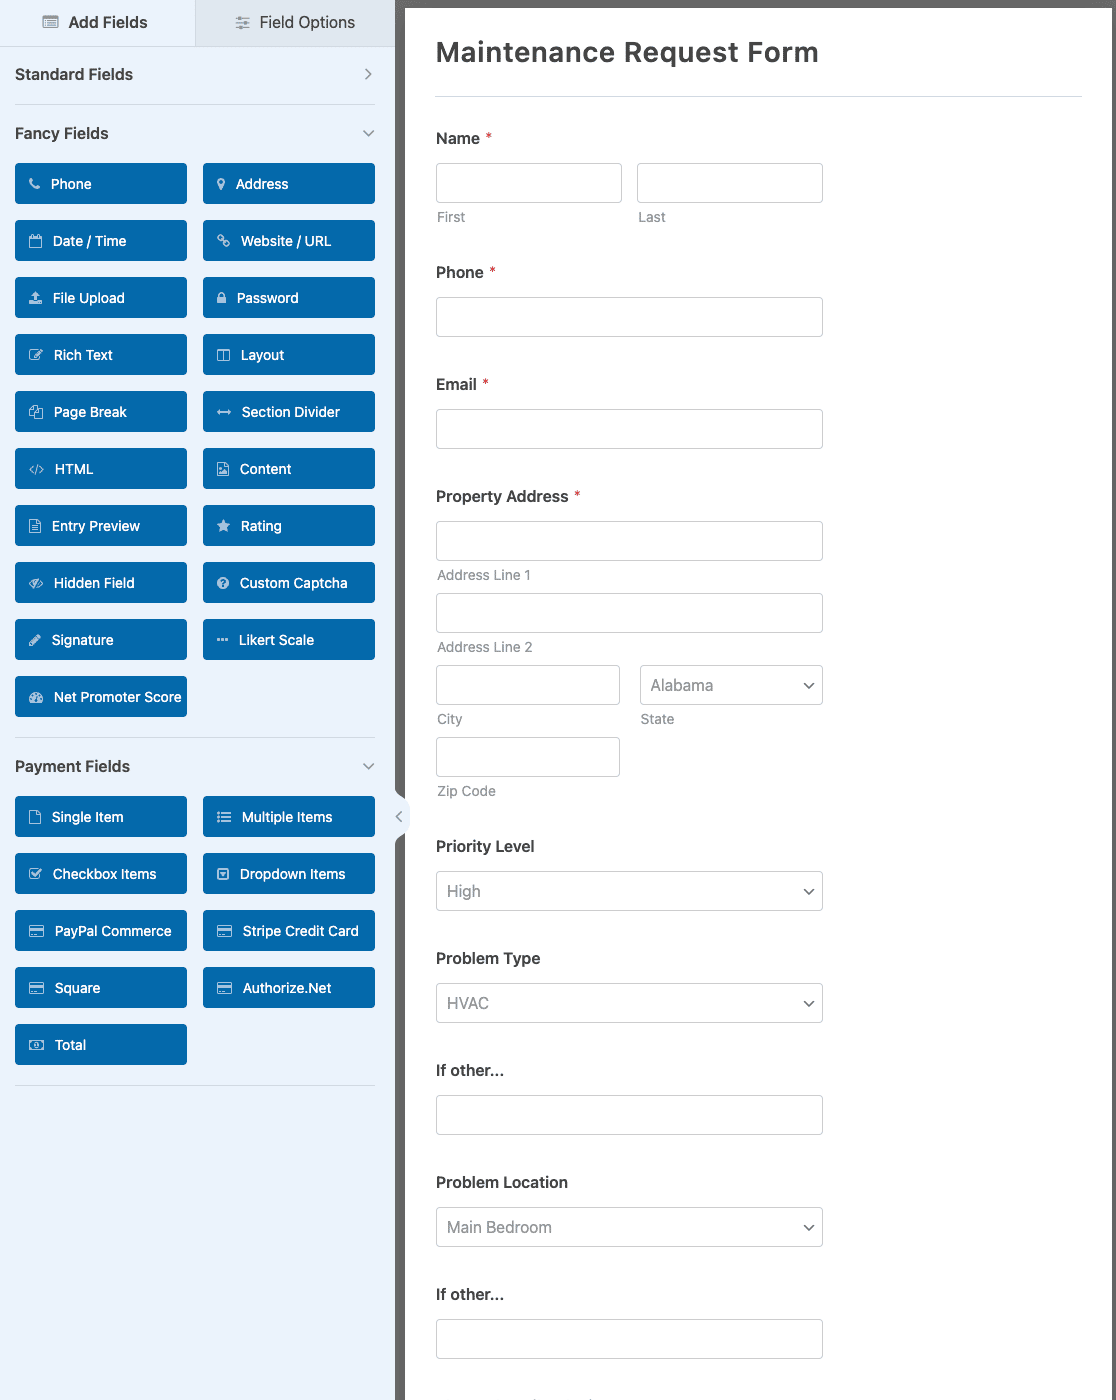 Customizing the Maintenance Request Form template